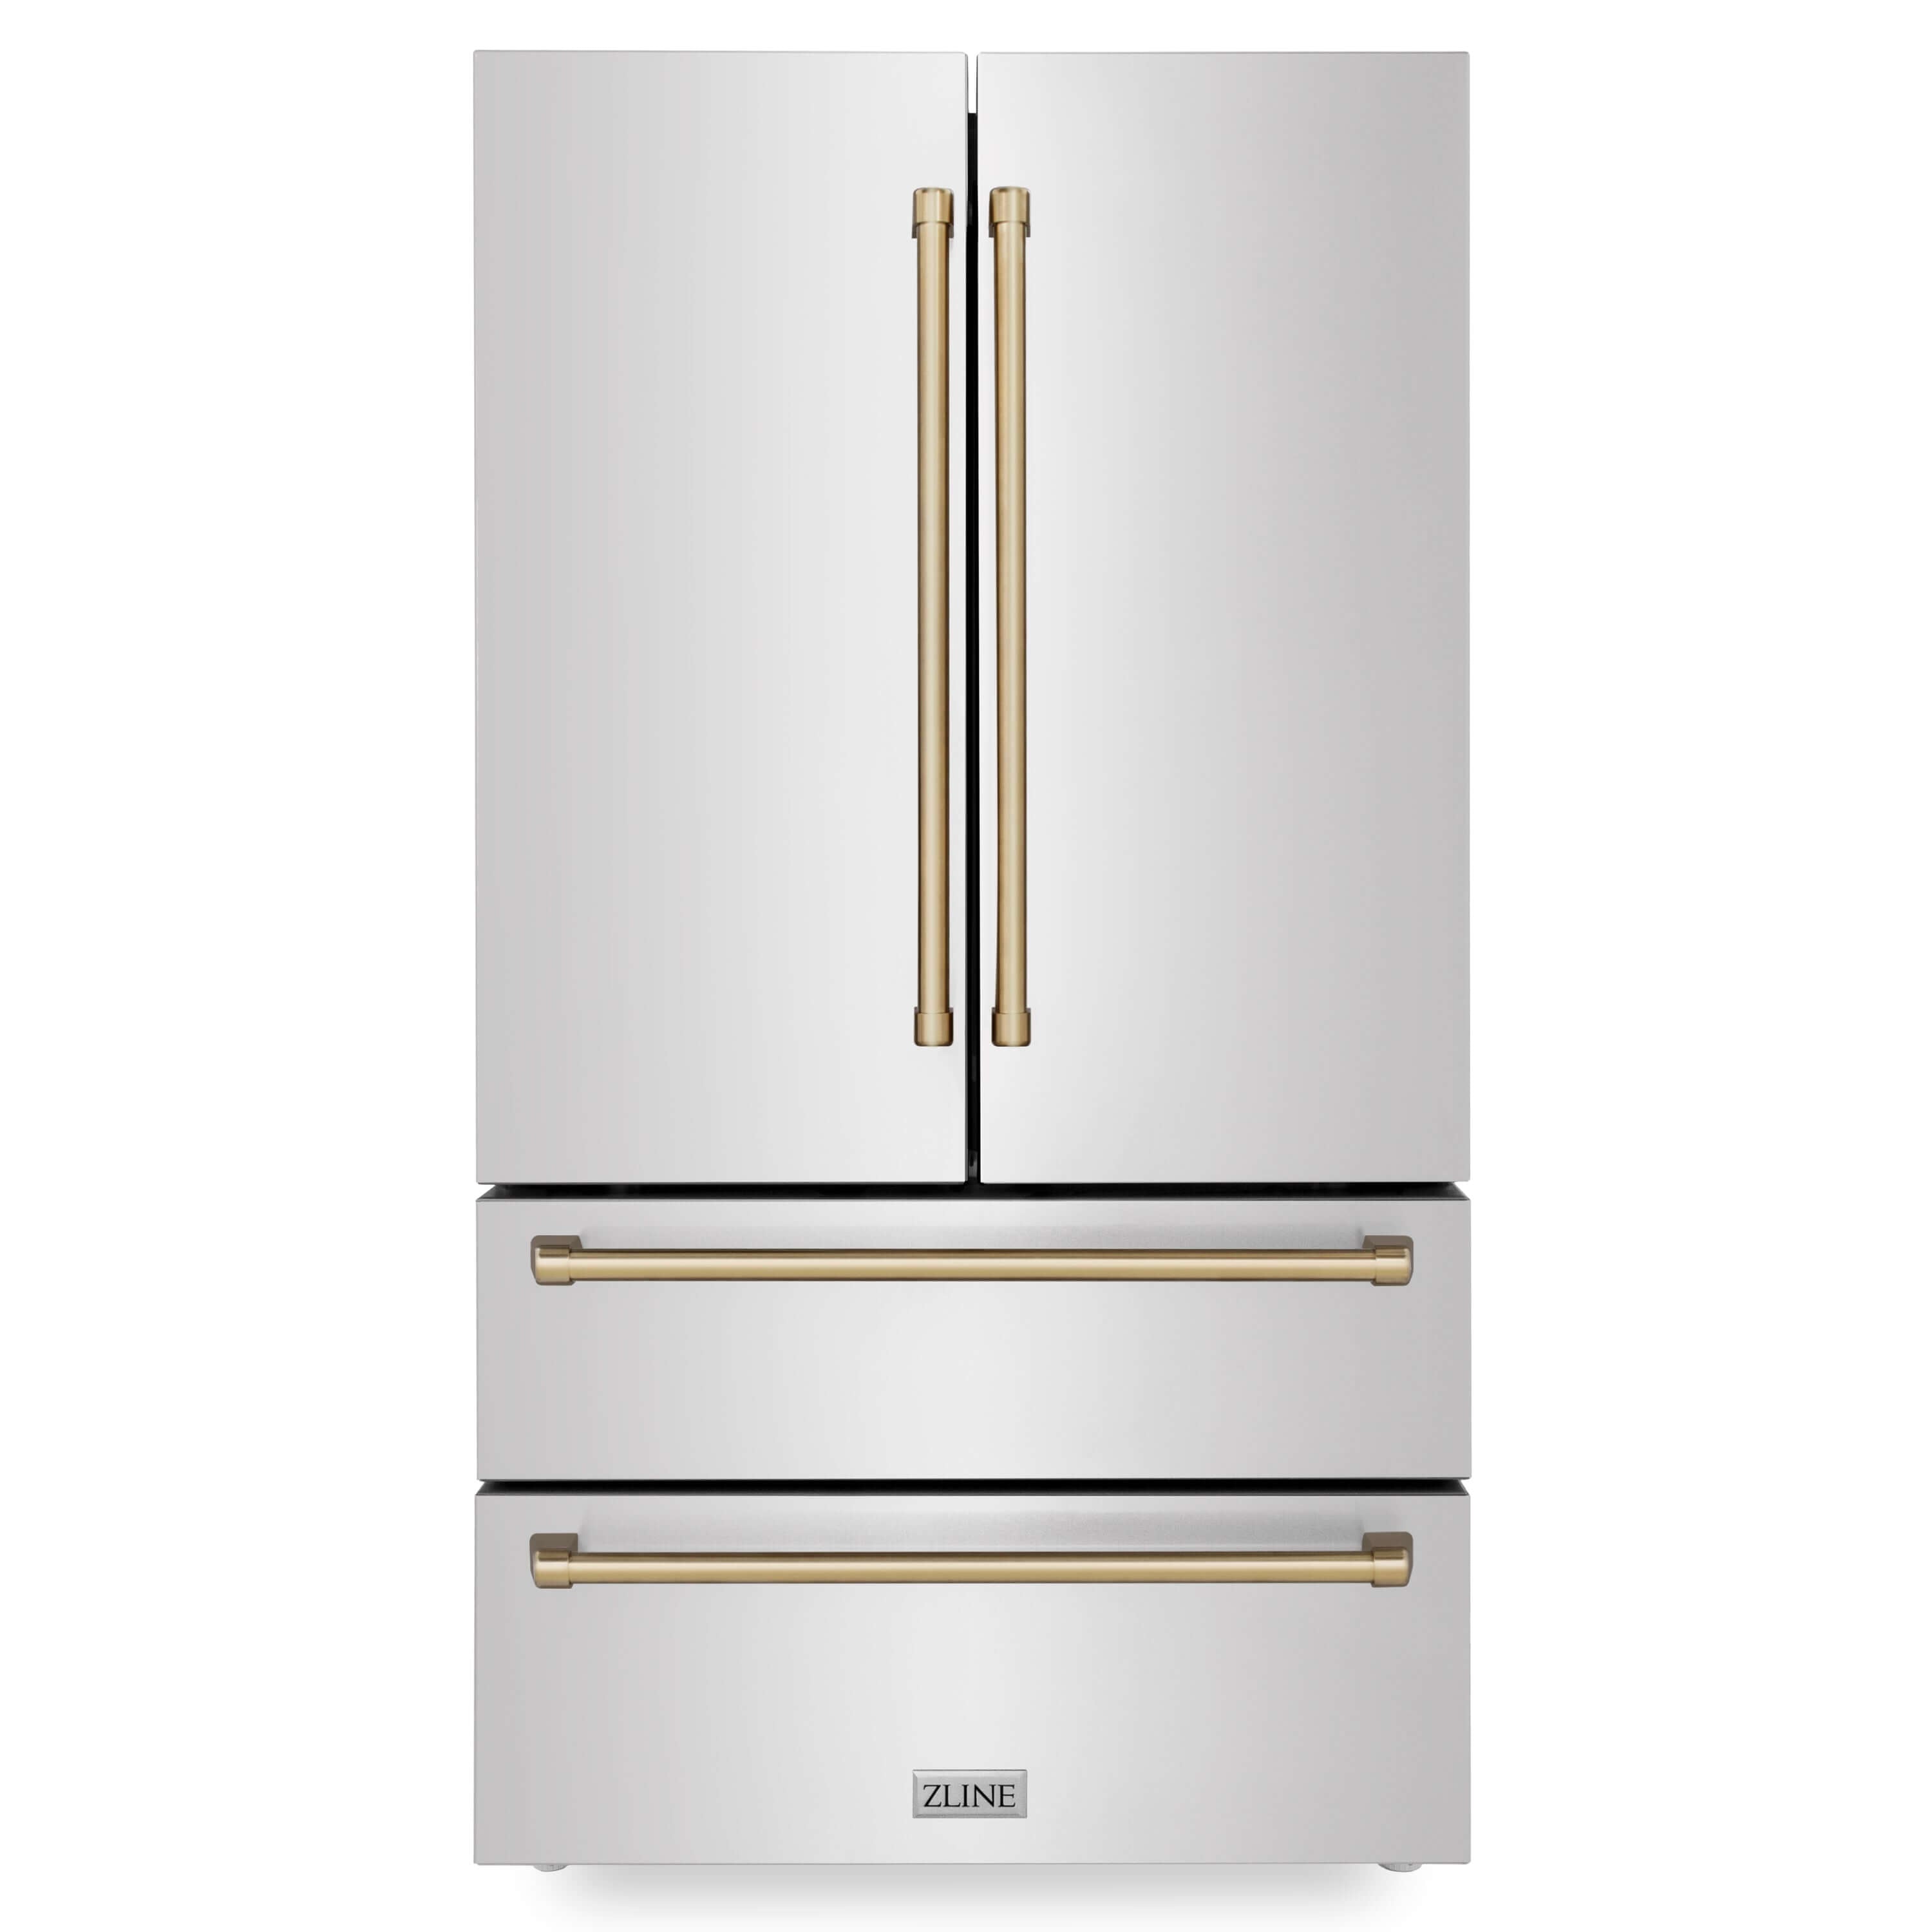 ZLINE 36 in. Autograph Edition French Door Refrigerator in Stainless Steel with Champagne Bronze Accents front.